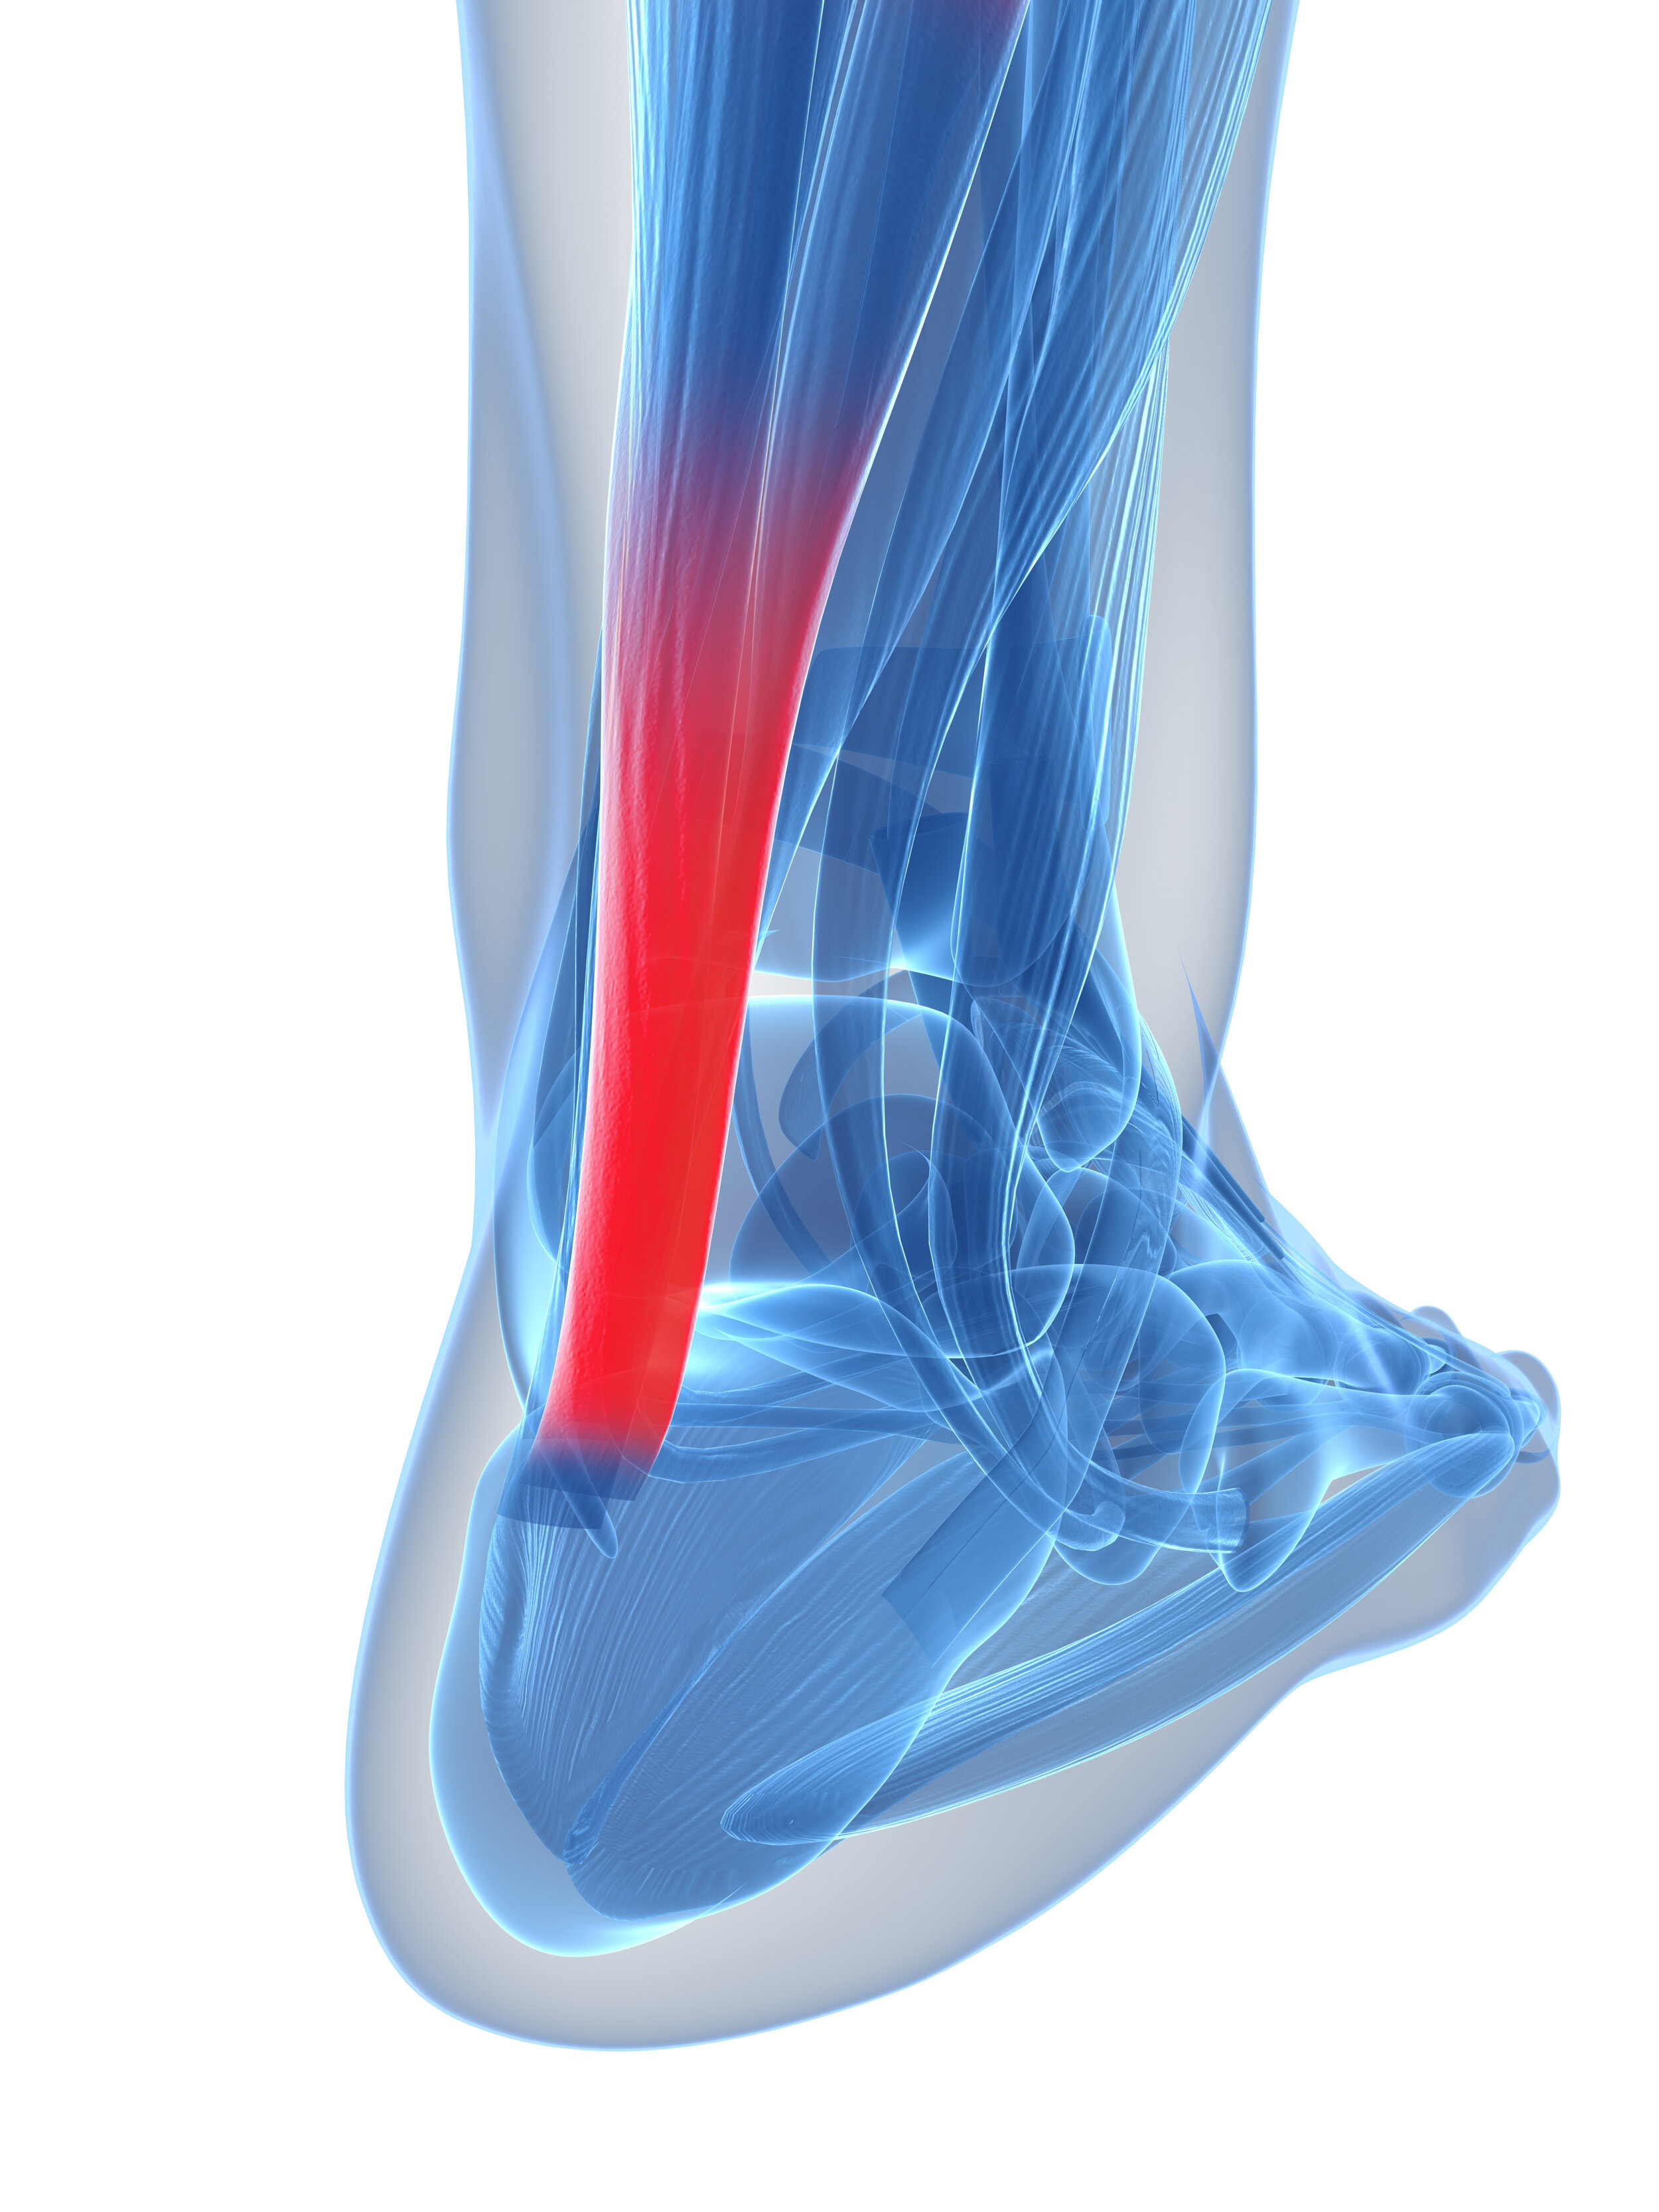 Ankle Pain: Causes, Treatment, and When to See a Doctor